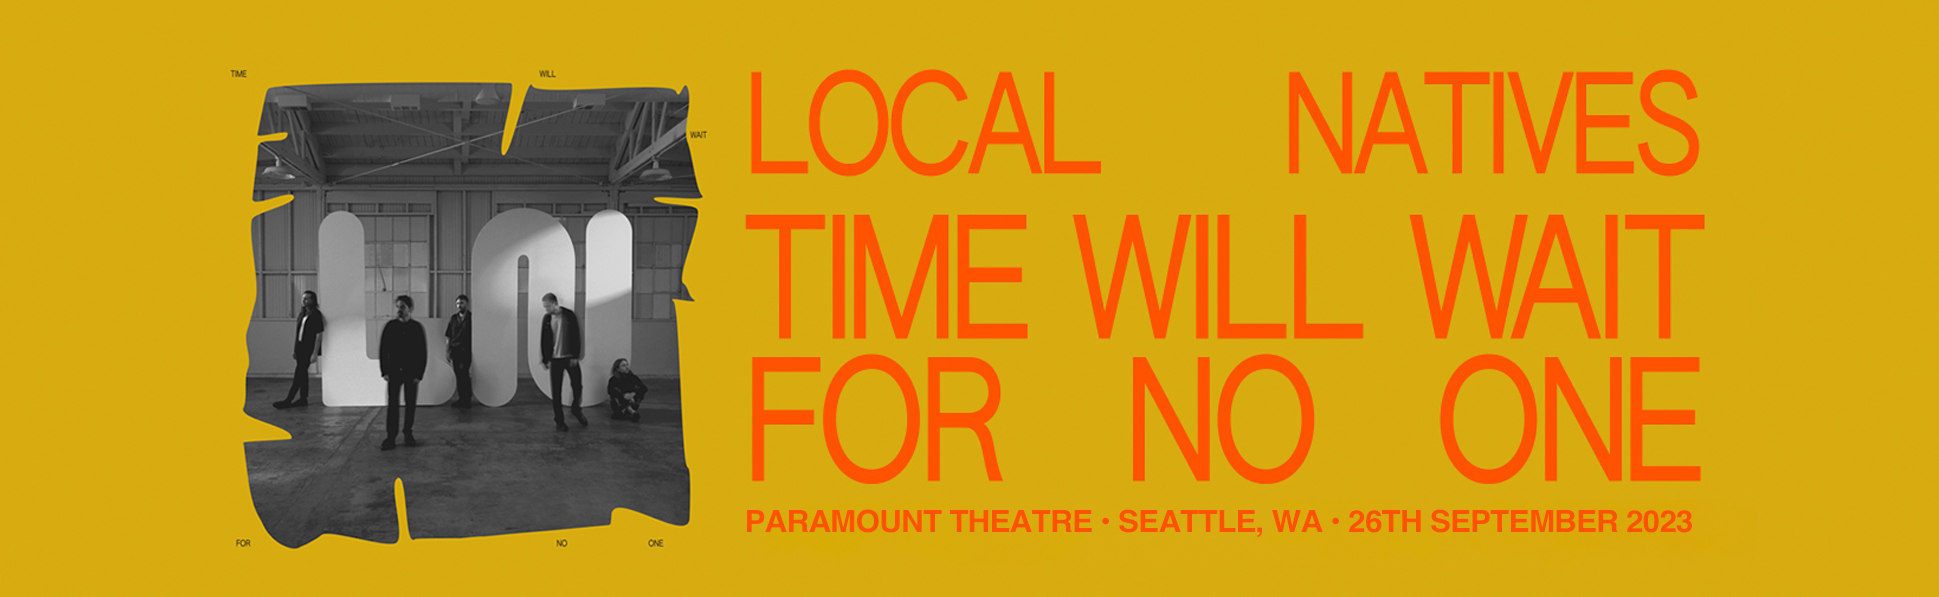 Local Natives at Paramount Theatre Seattle